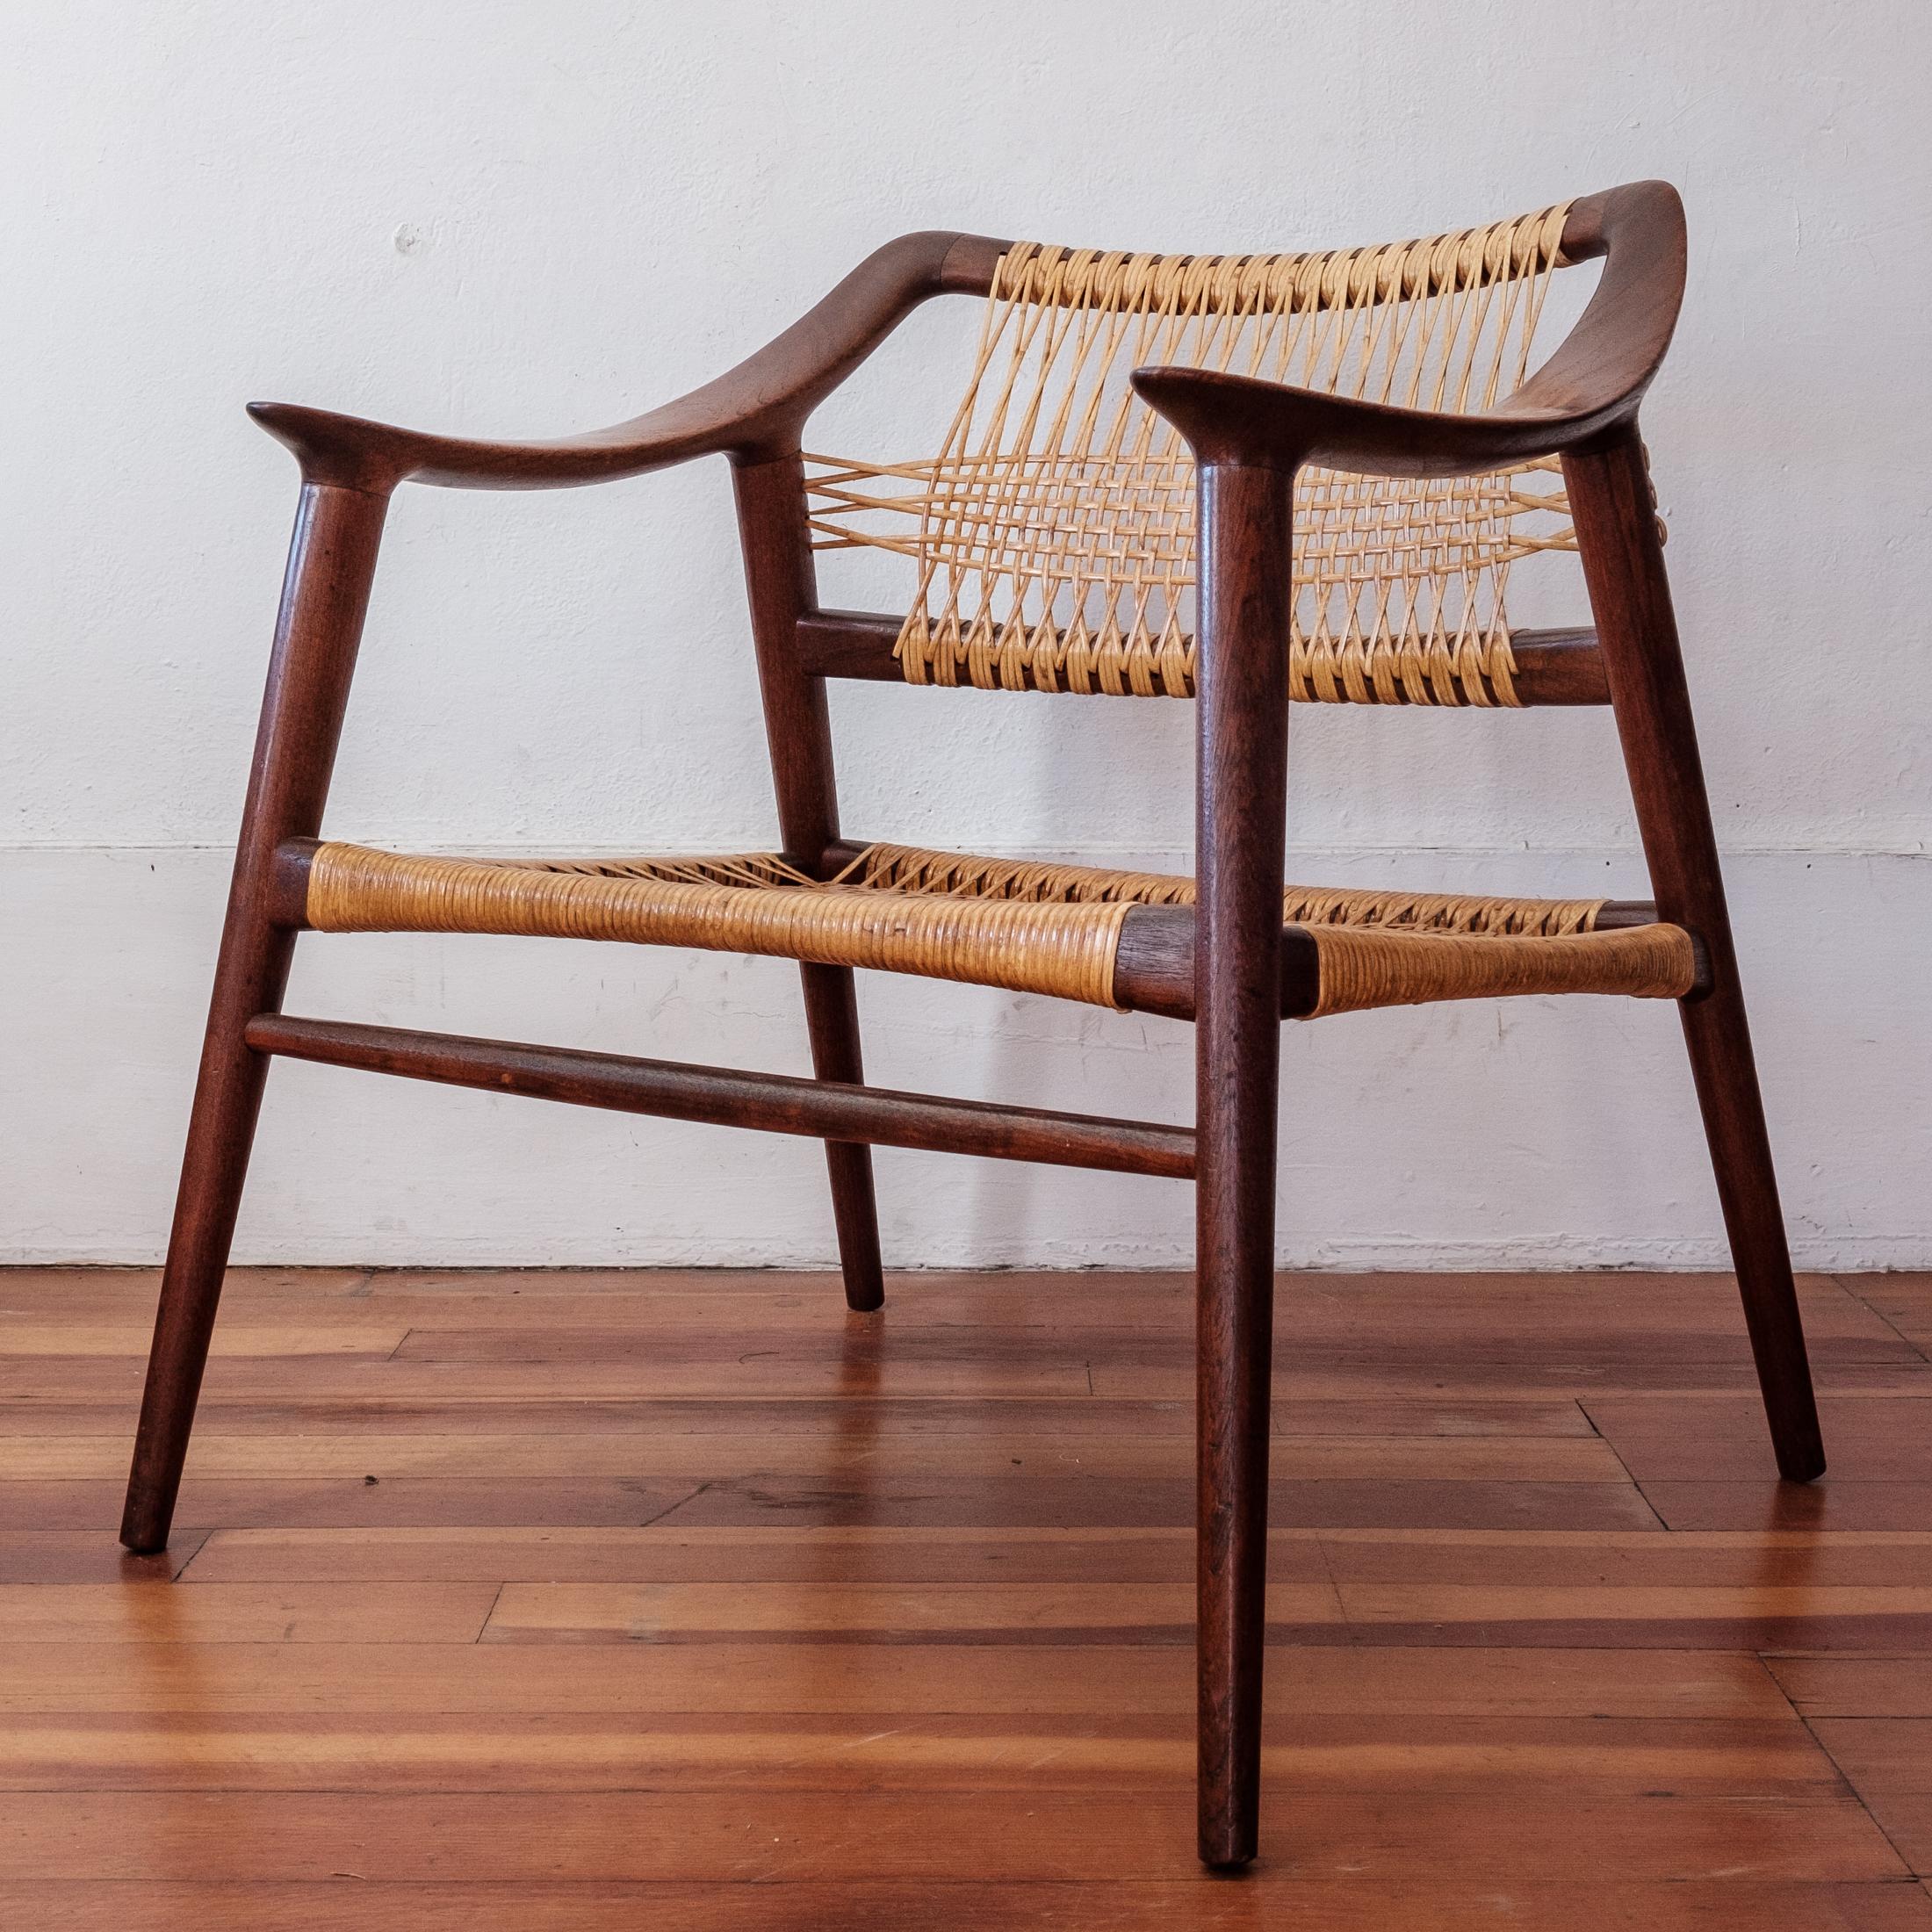 Rolf Rastad & Adolf Relling “Bambi” Cane Armchair  In Good Condition For Sale In San Diego, CA